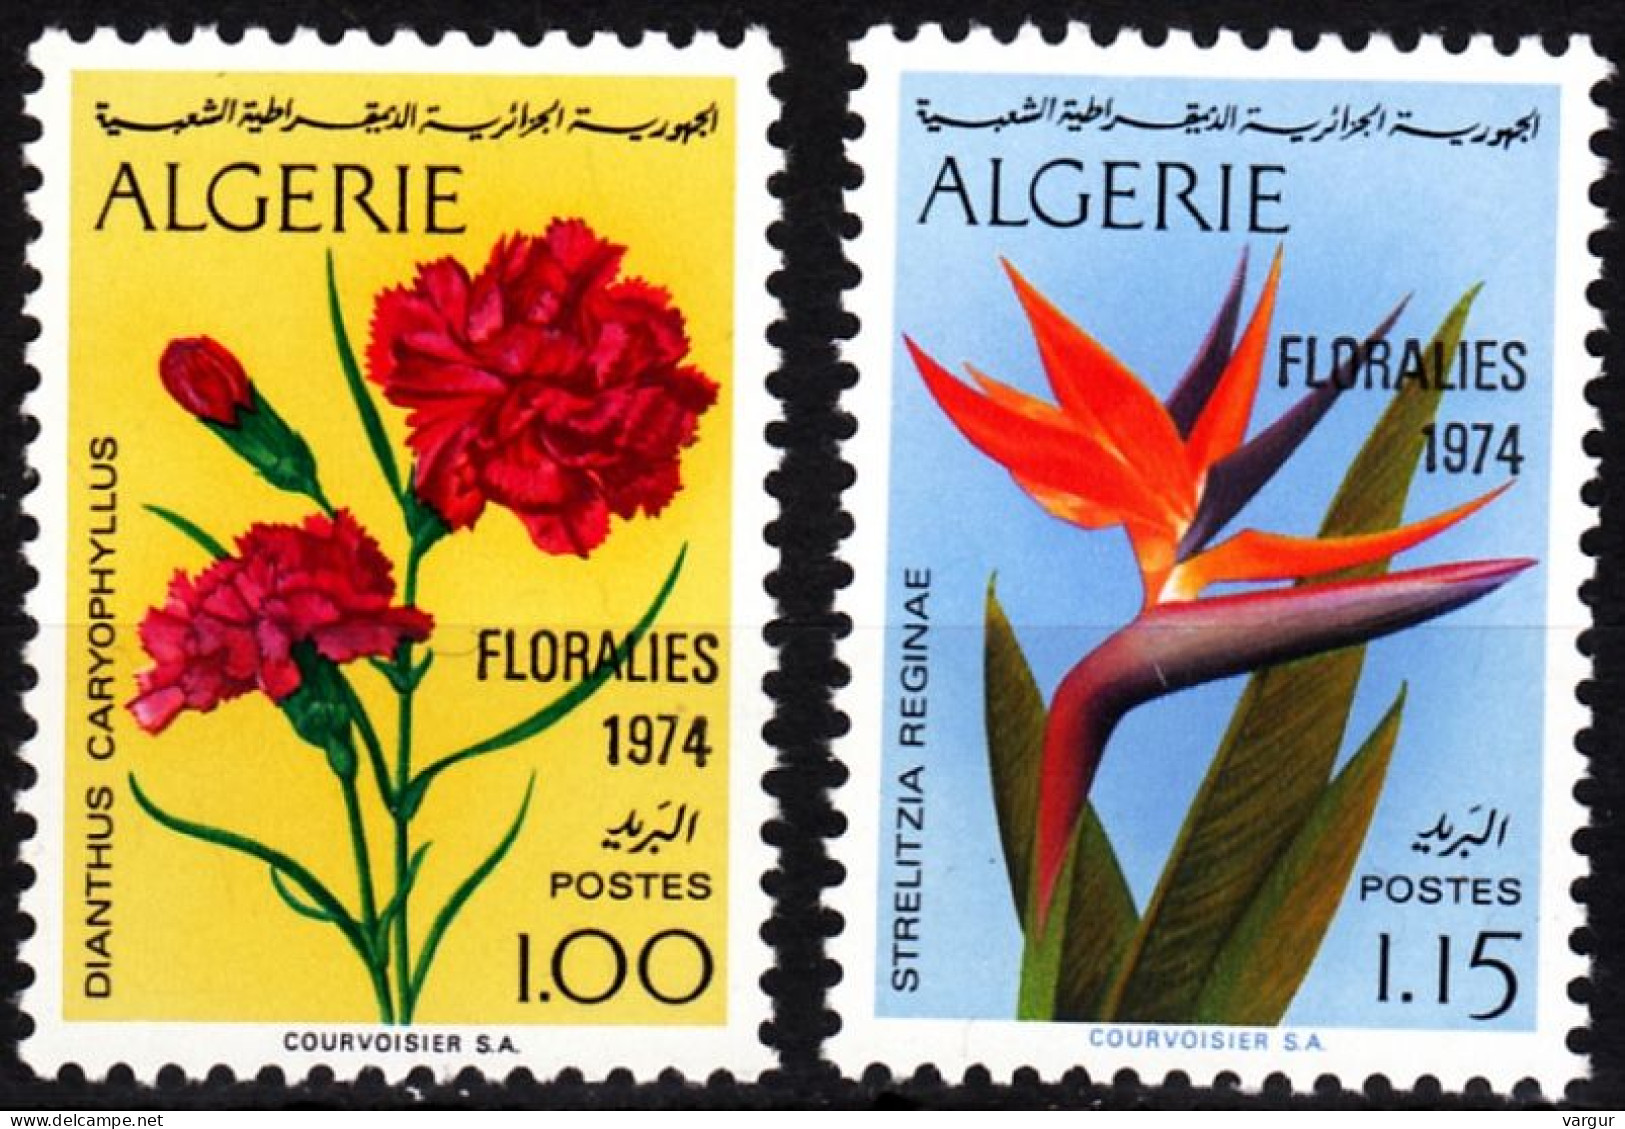 ALGERIA 1974 Flowers. Pink Orchid, Overprinted. Complete, MNH - Orchideen